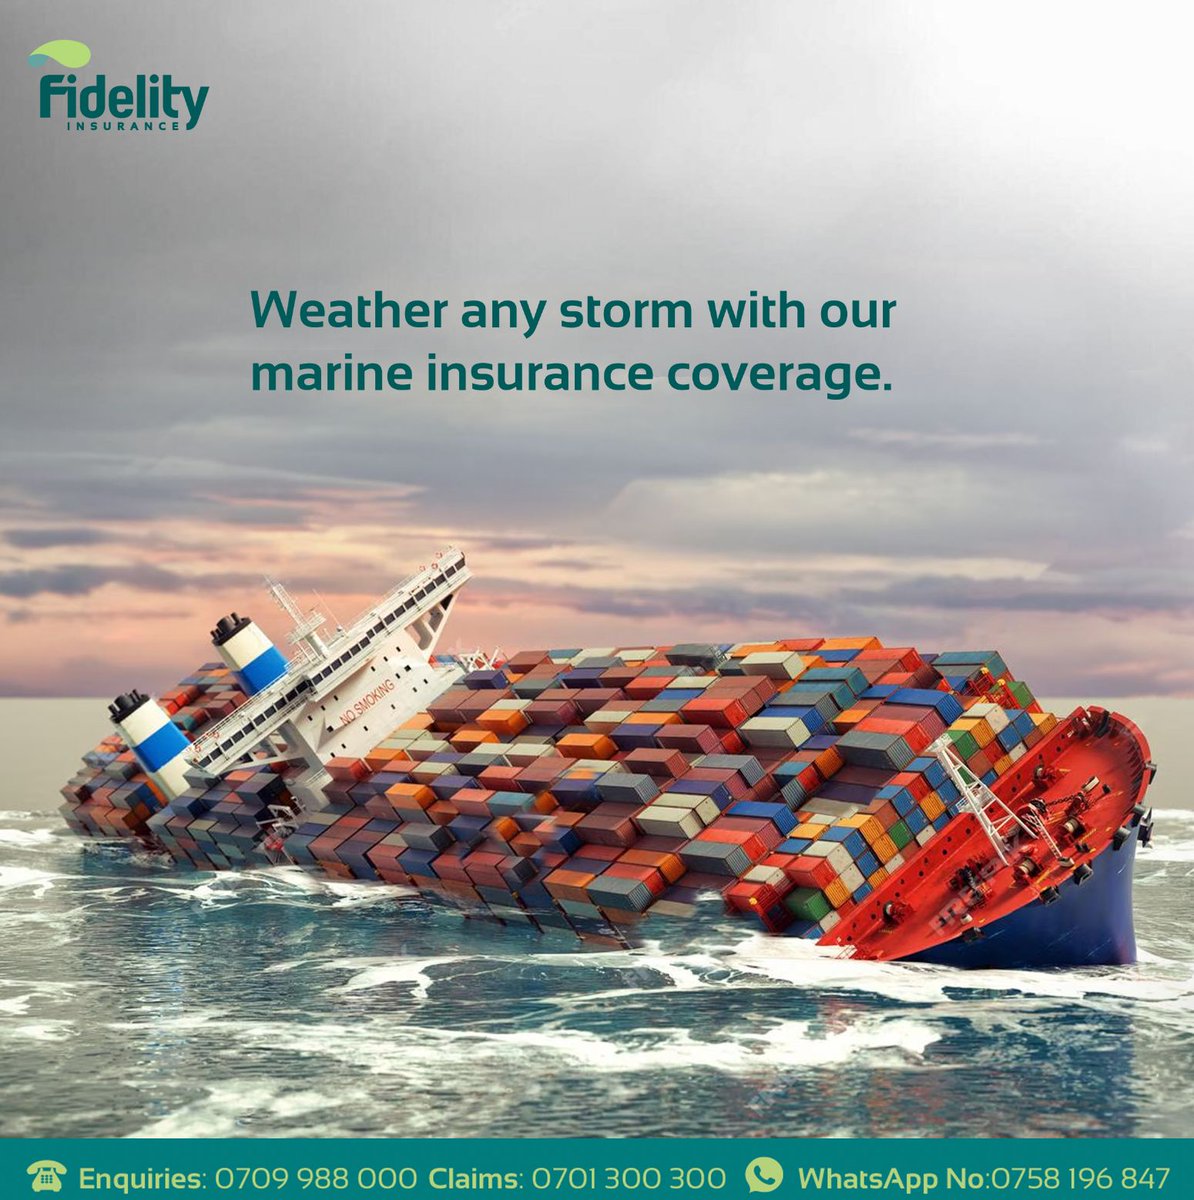 Protect your business at sea with our marine insurance.  Call us today on 0709988000 and learn more about our tailored coverage options today.  
#fidelityinsurance #insuraceyoucantrust #insurance  #MarineInsurance